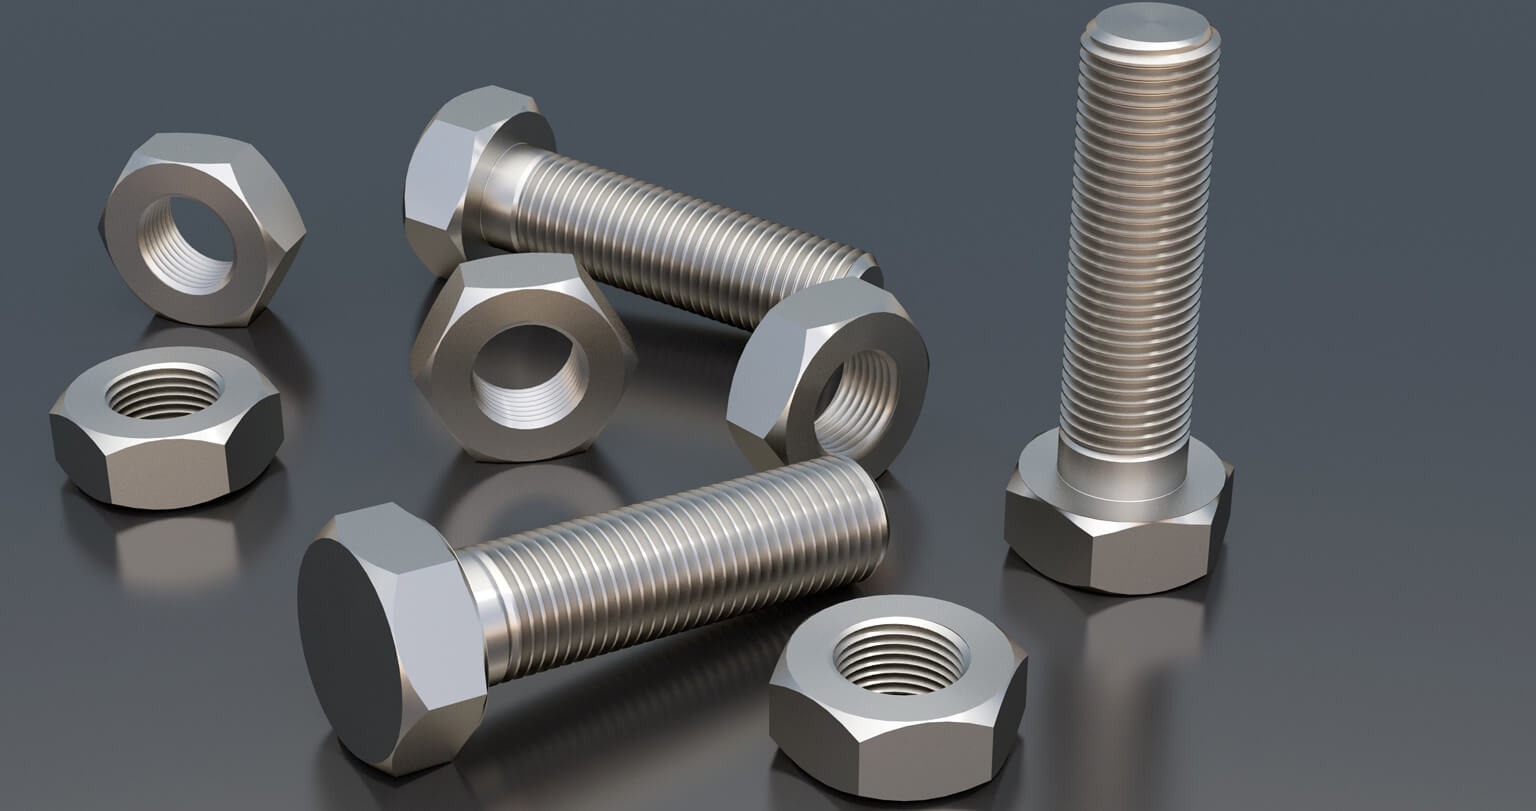 incoloy-825-fasteners-manufacturers-suppliers-stockists-exporters